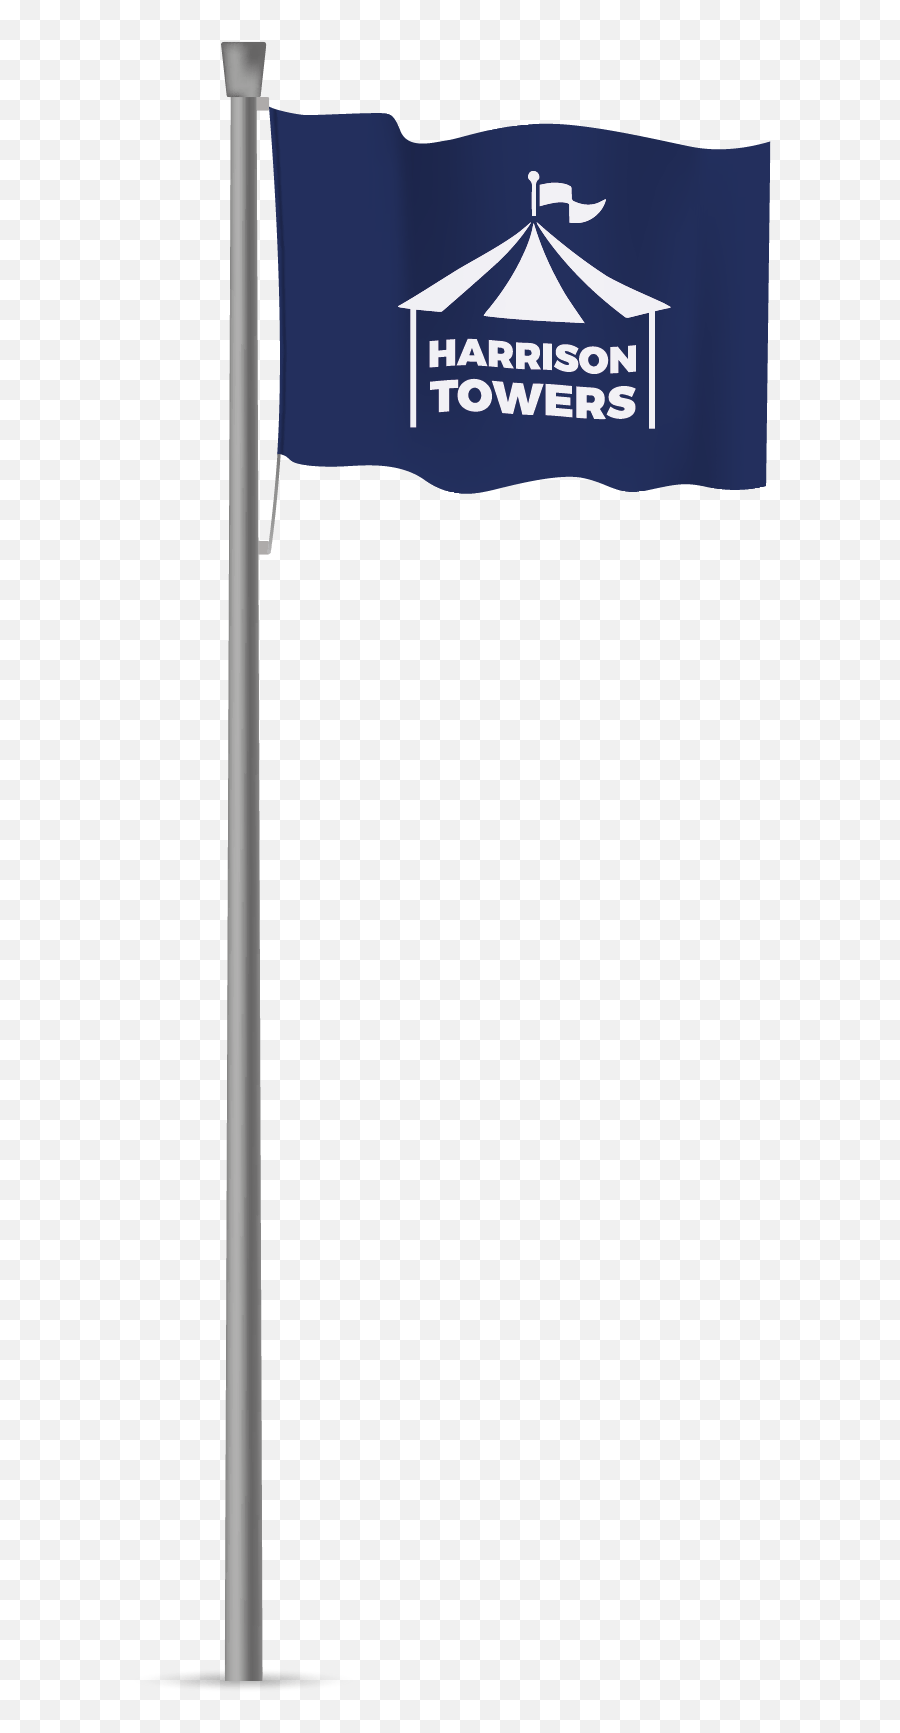 Quality Flagpoles And Flags Home - Harrison Flagpoles Emoji,Flagpole Png